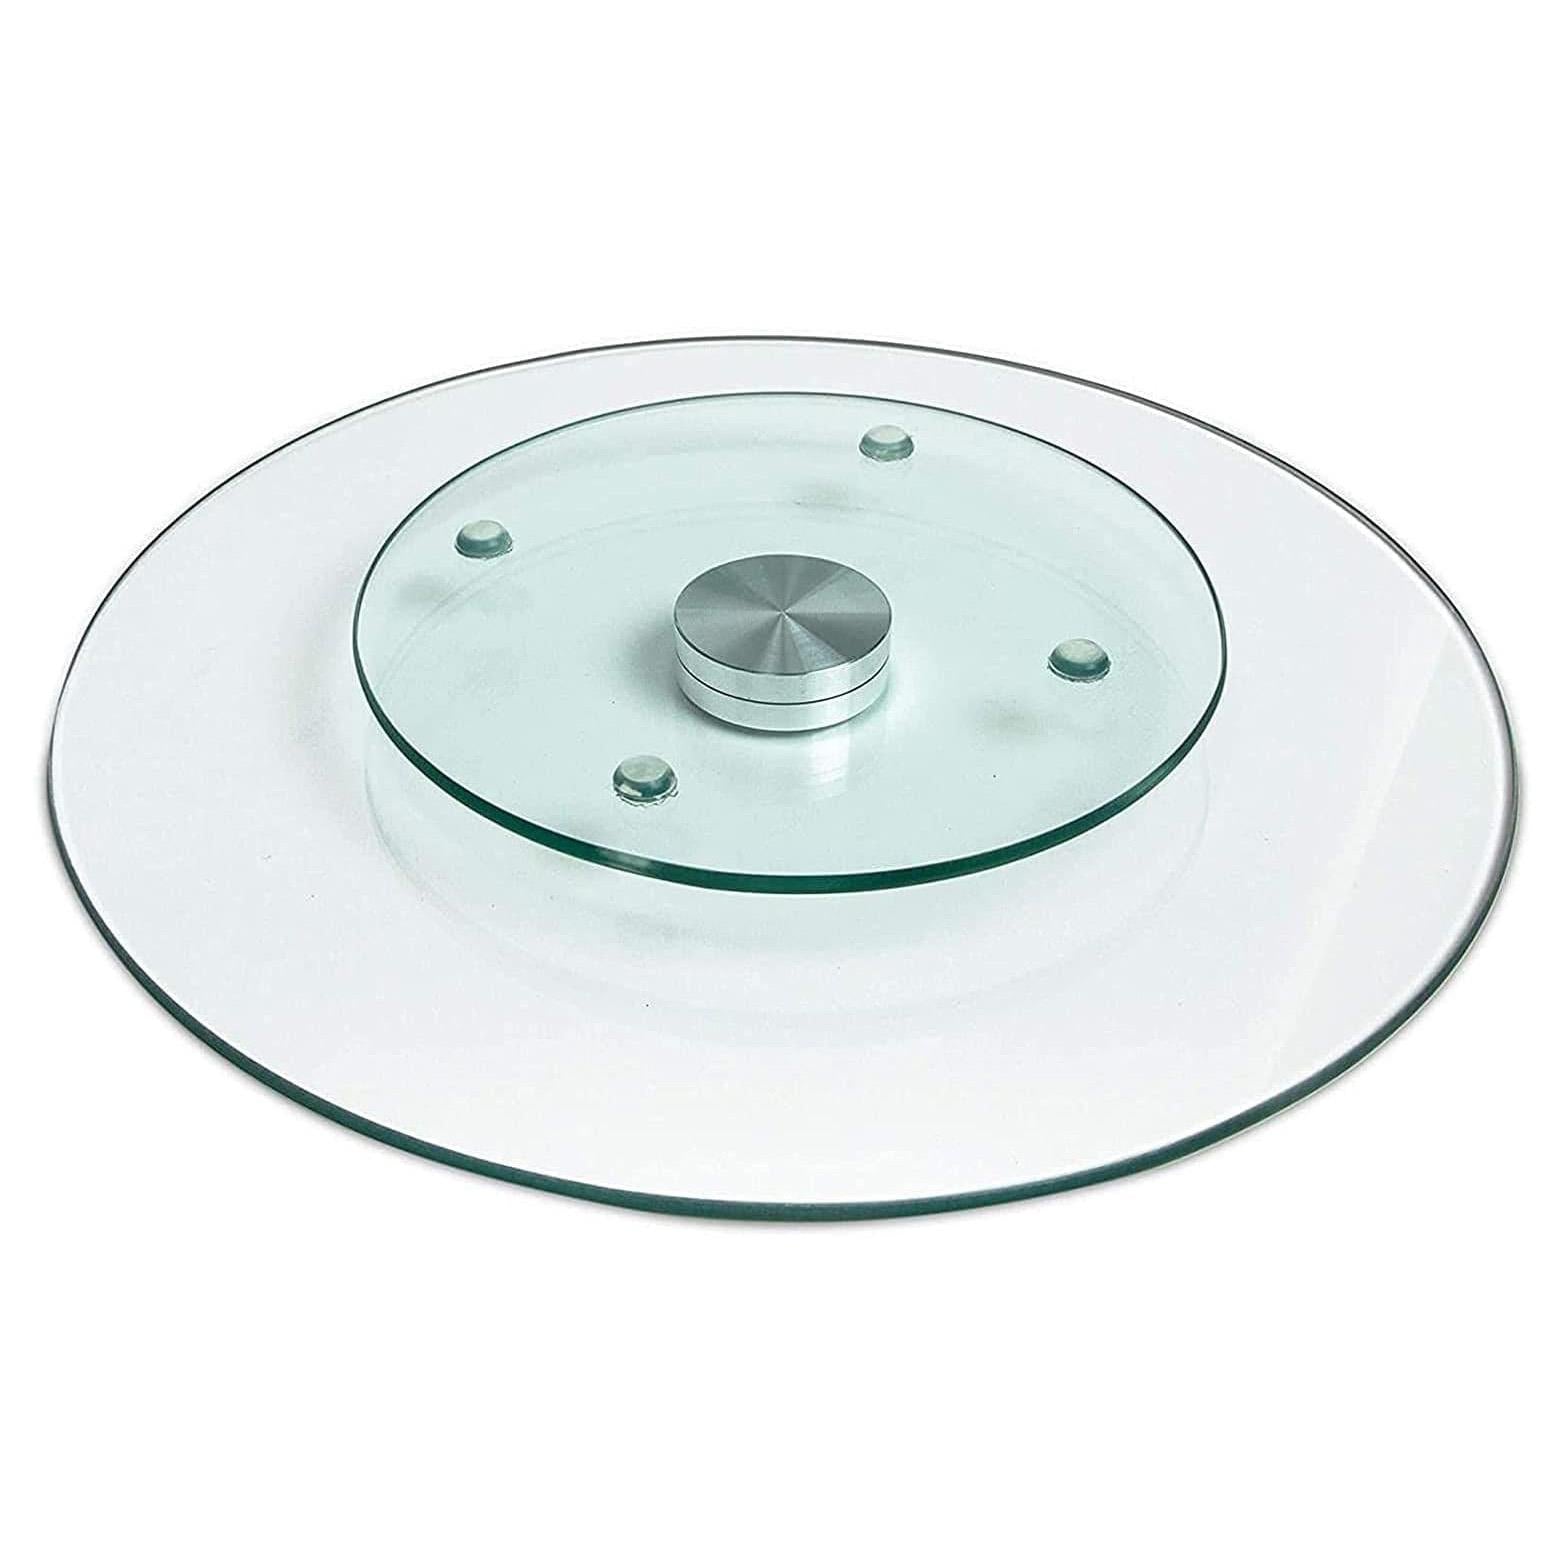 Lazy Susan Rotating Turntable 25cm by GEEZY - UKBuyZone